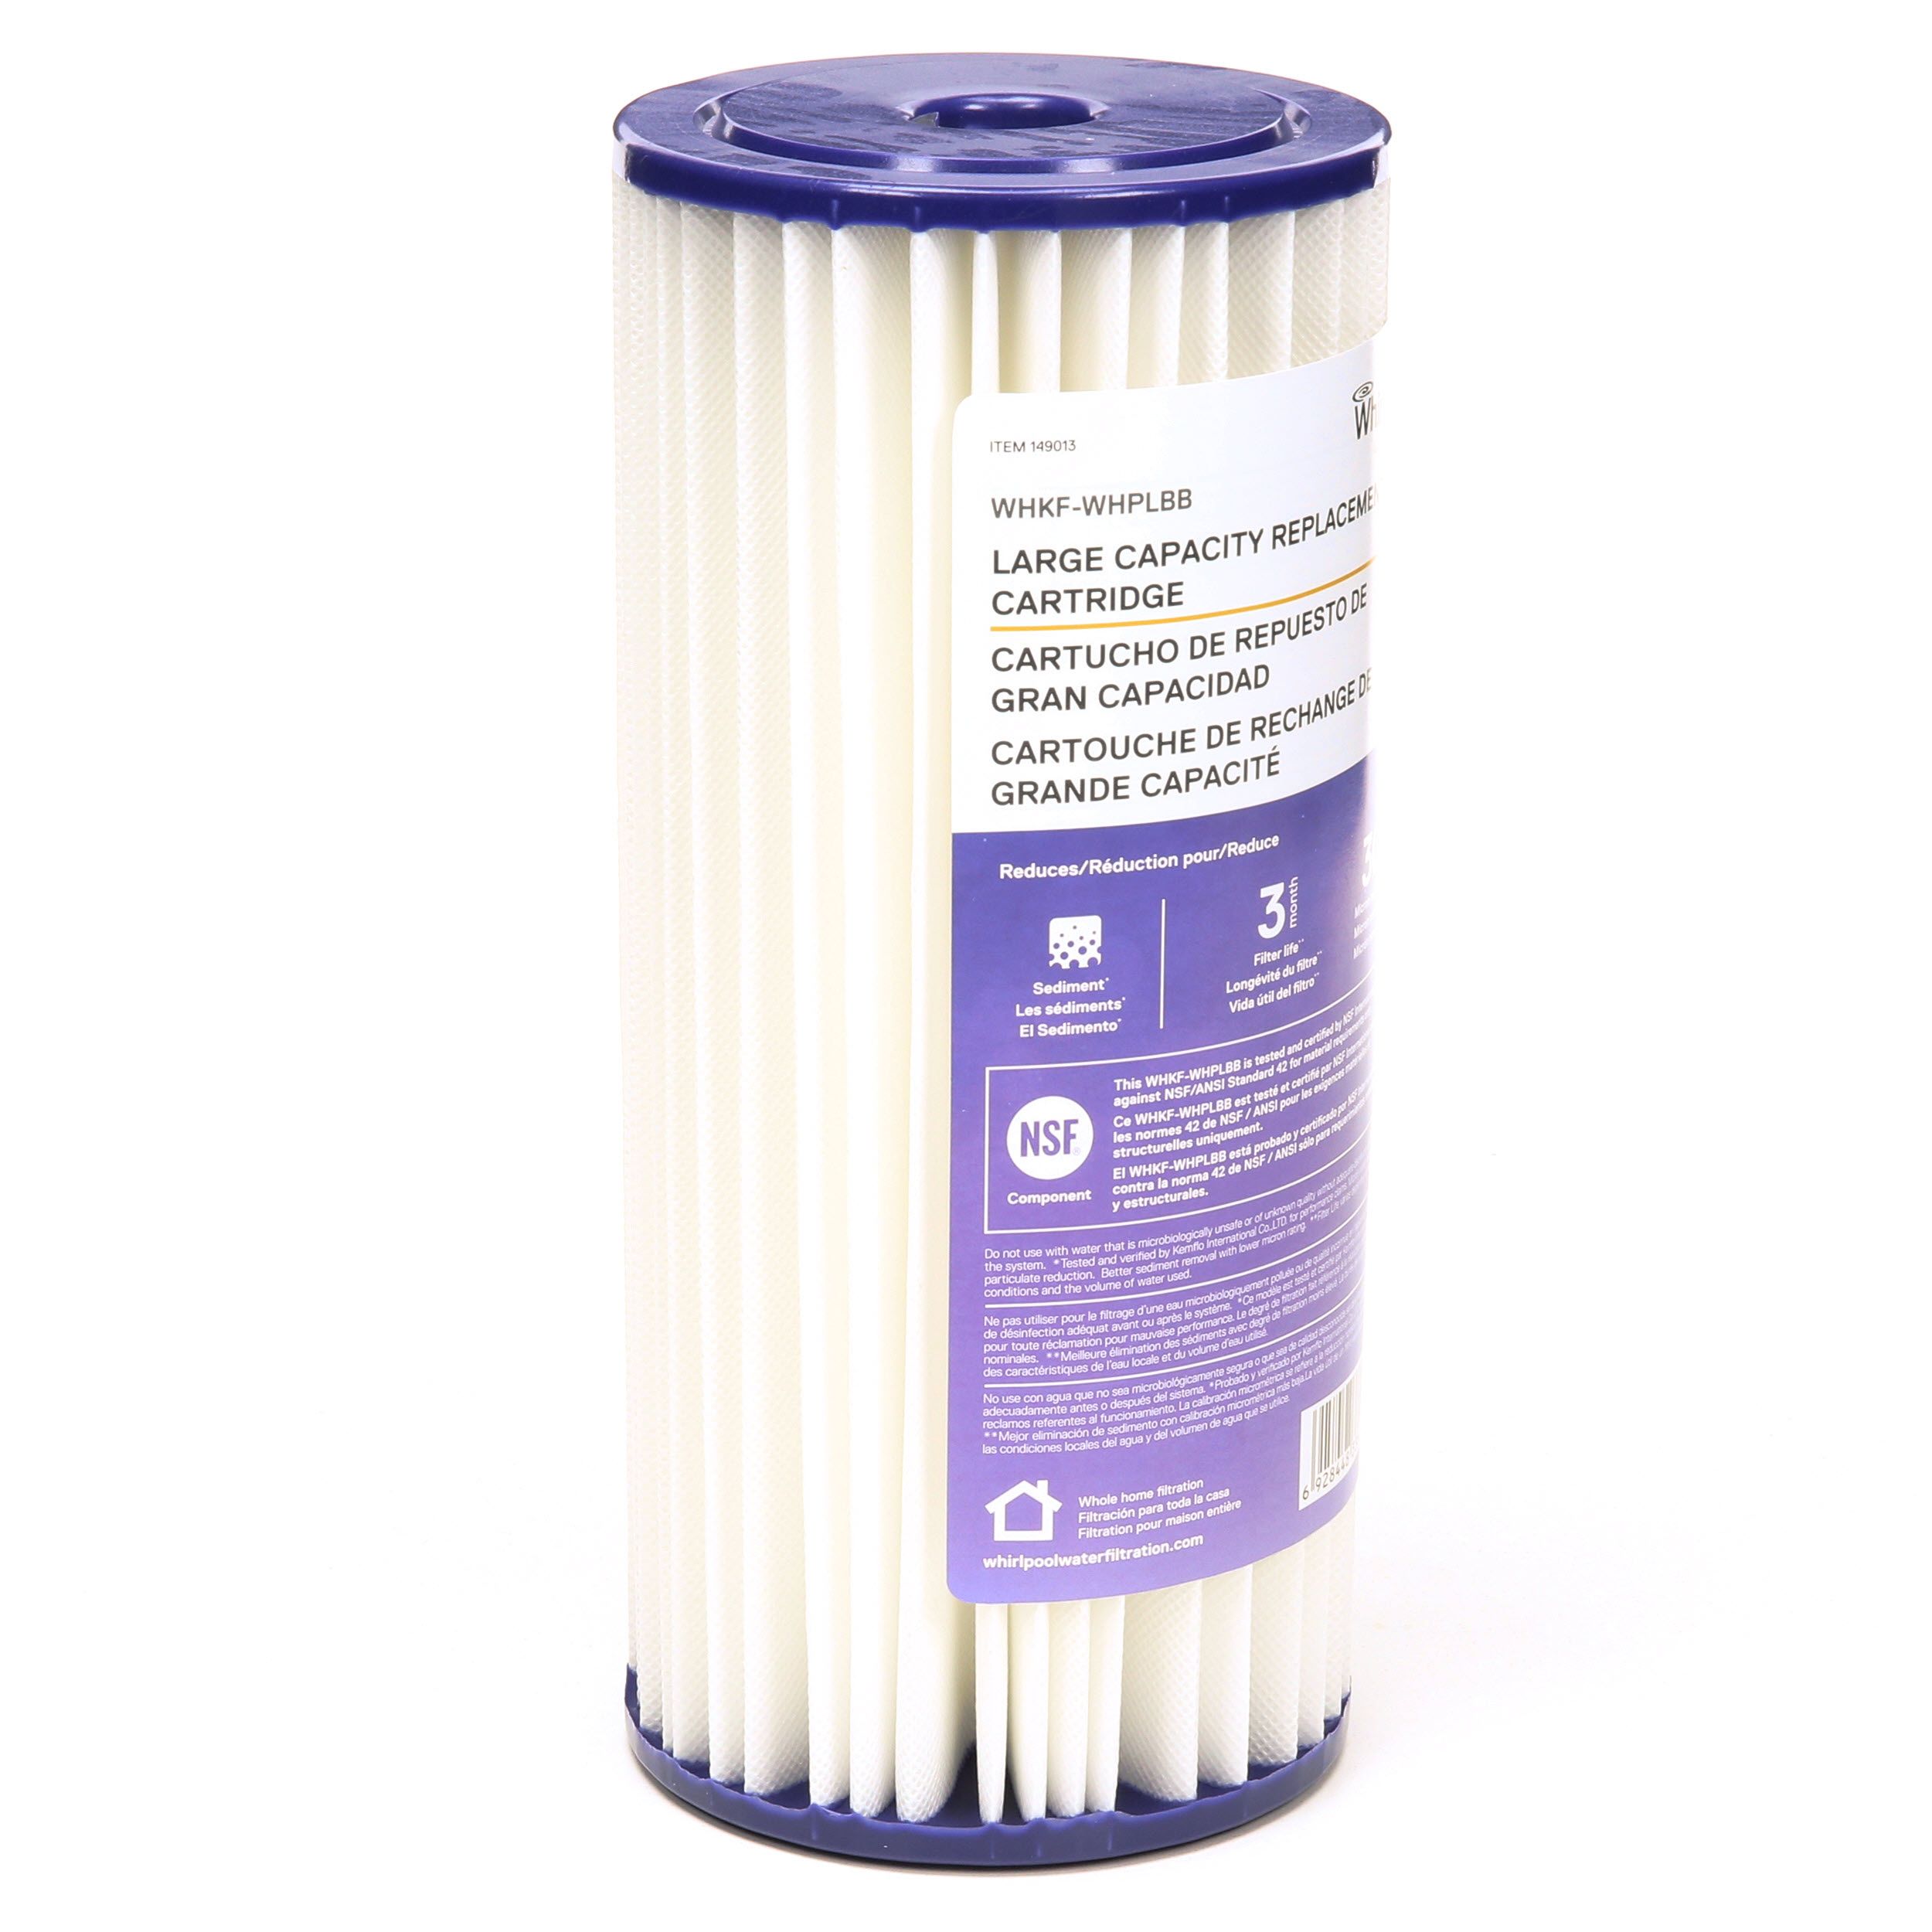 Whirlpool Large Capacity Whole House Replacement Filter WHKF-WHPLBB for sale online 